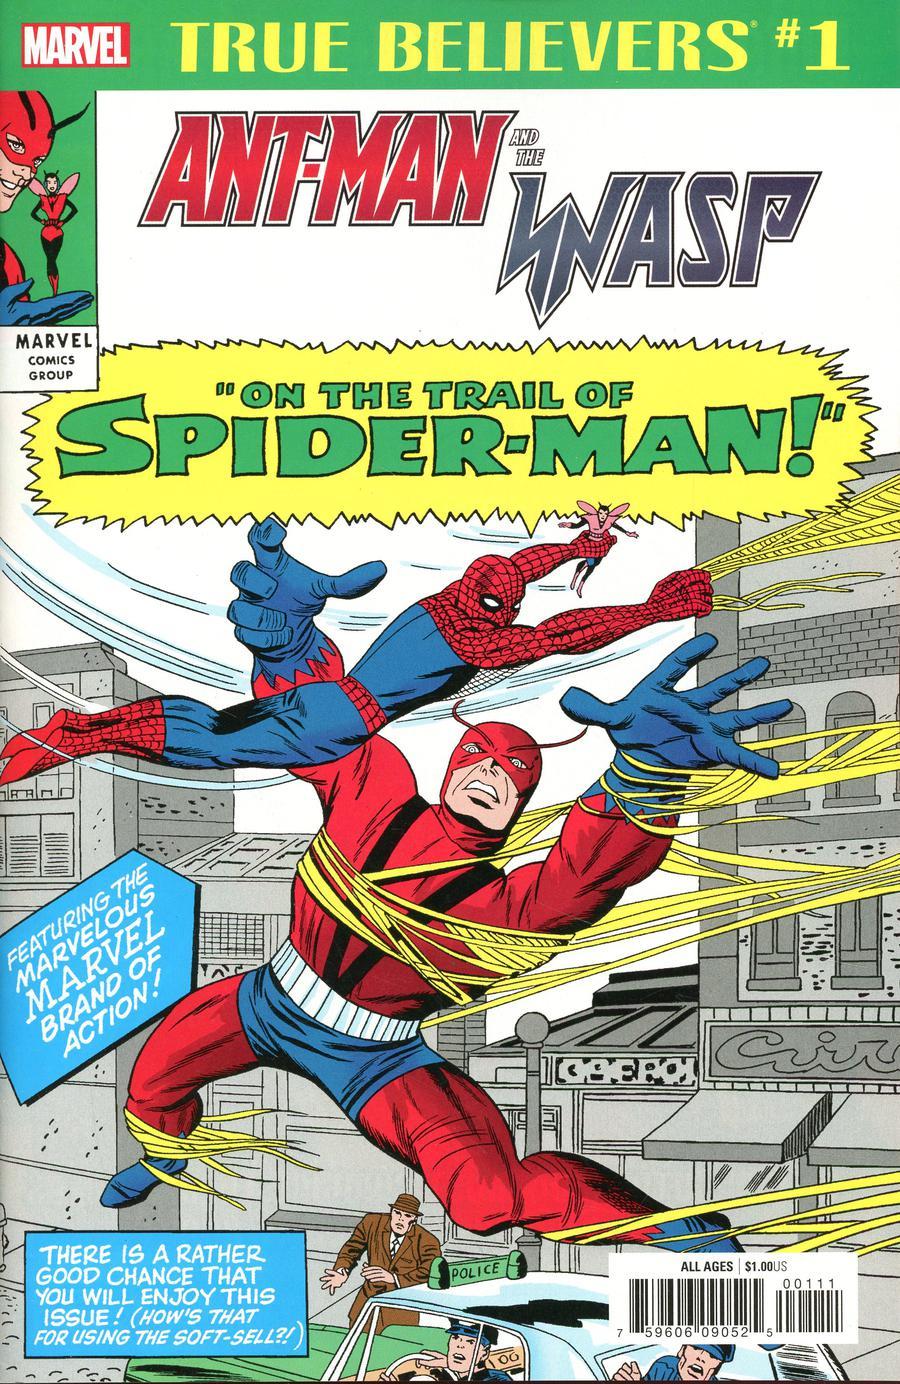 True Believers Ant-Man And The Wasp On The Trail Of Spider-Man Vol. 1 #1